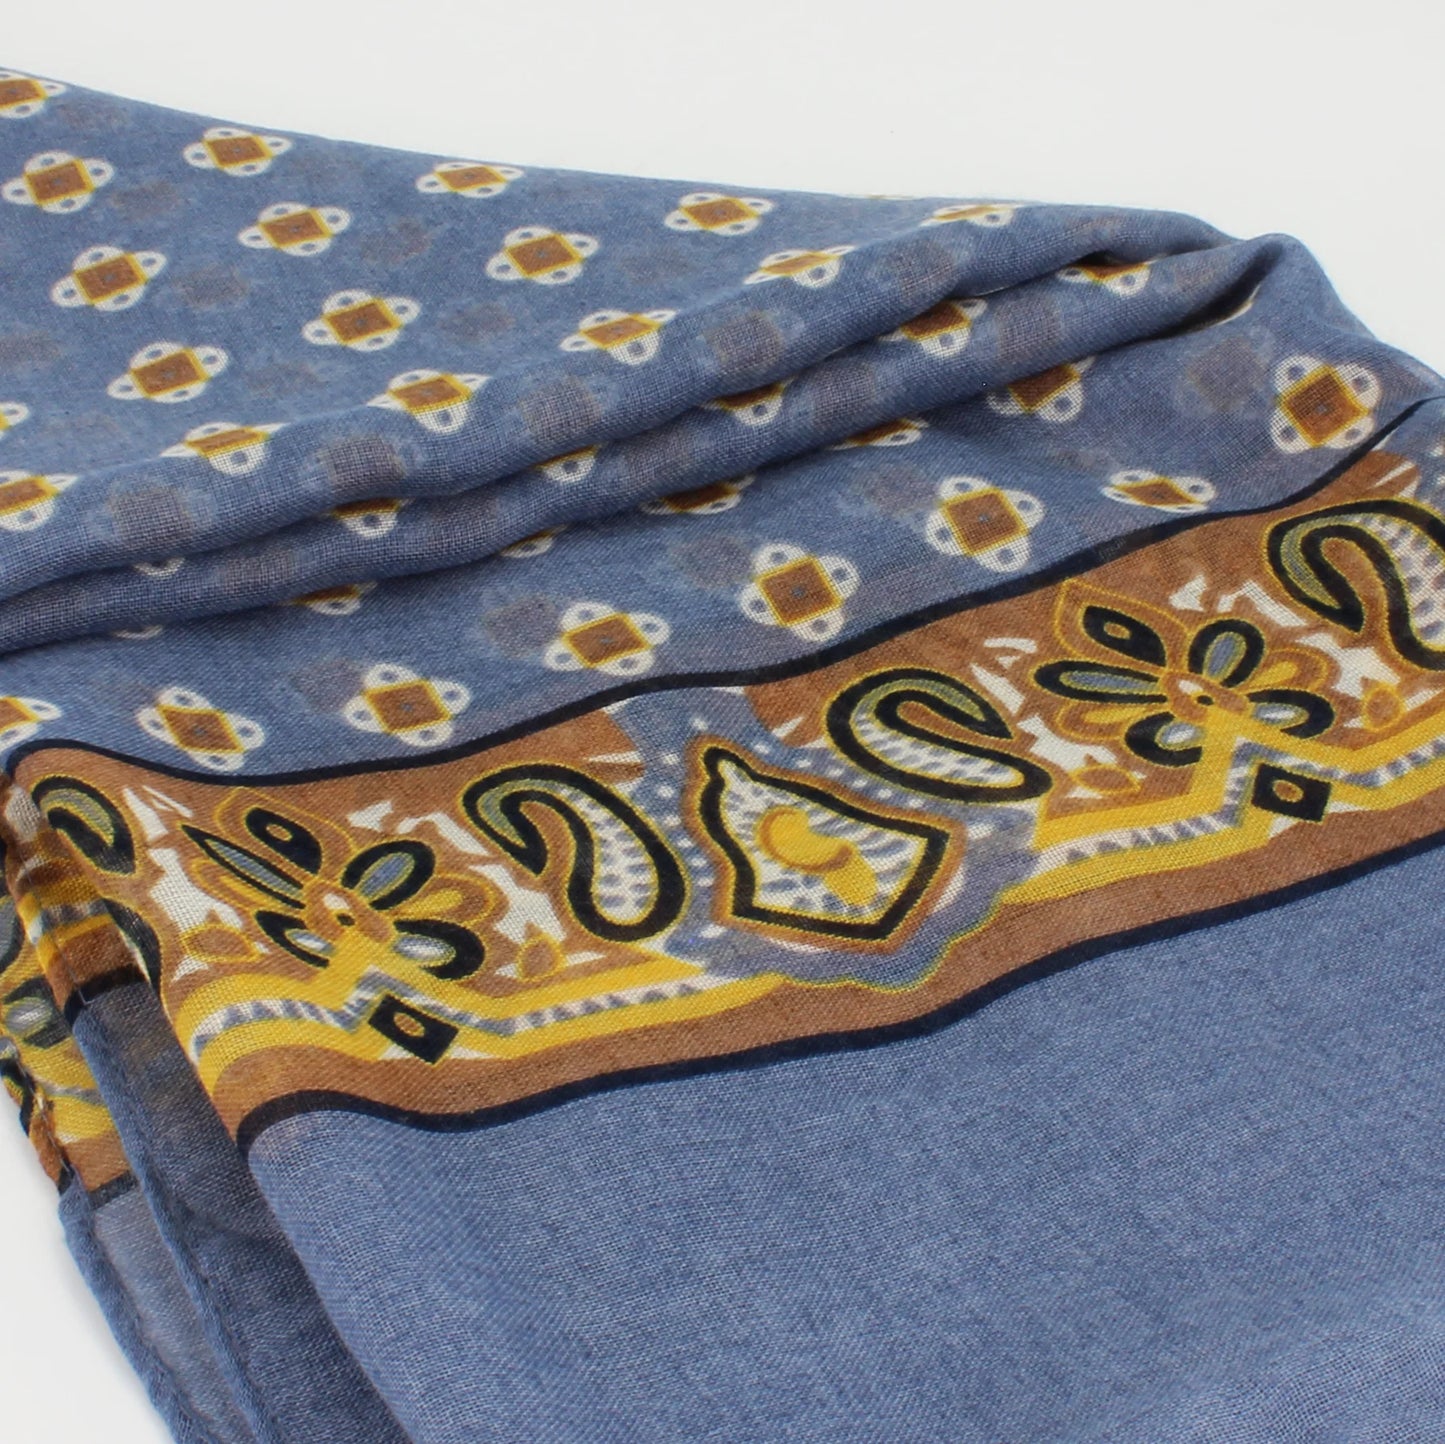 Shop Unisex Patterened Scarf in Light Blue or browse our range of scarves for men and women in a variety of colours in-store at Aliverti Cape Town, or shop online. We deliver in South Africa & offer multiple payment plans as well as accept multiple safe & secure payment methods.